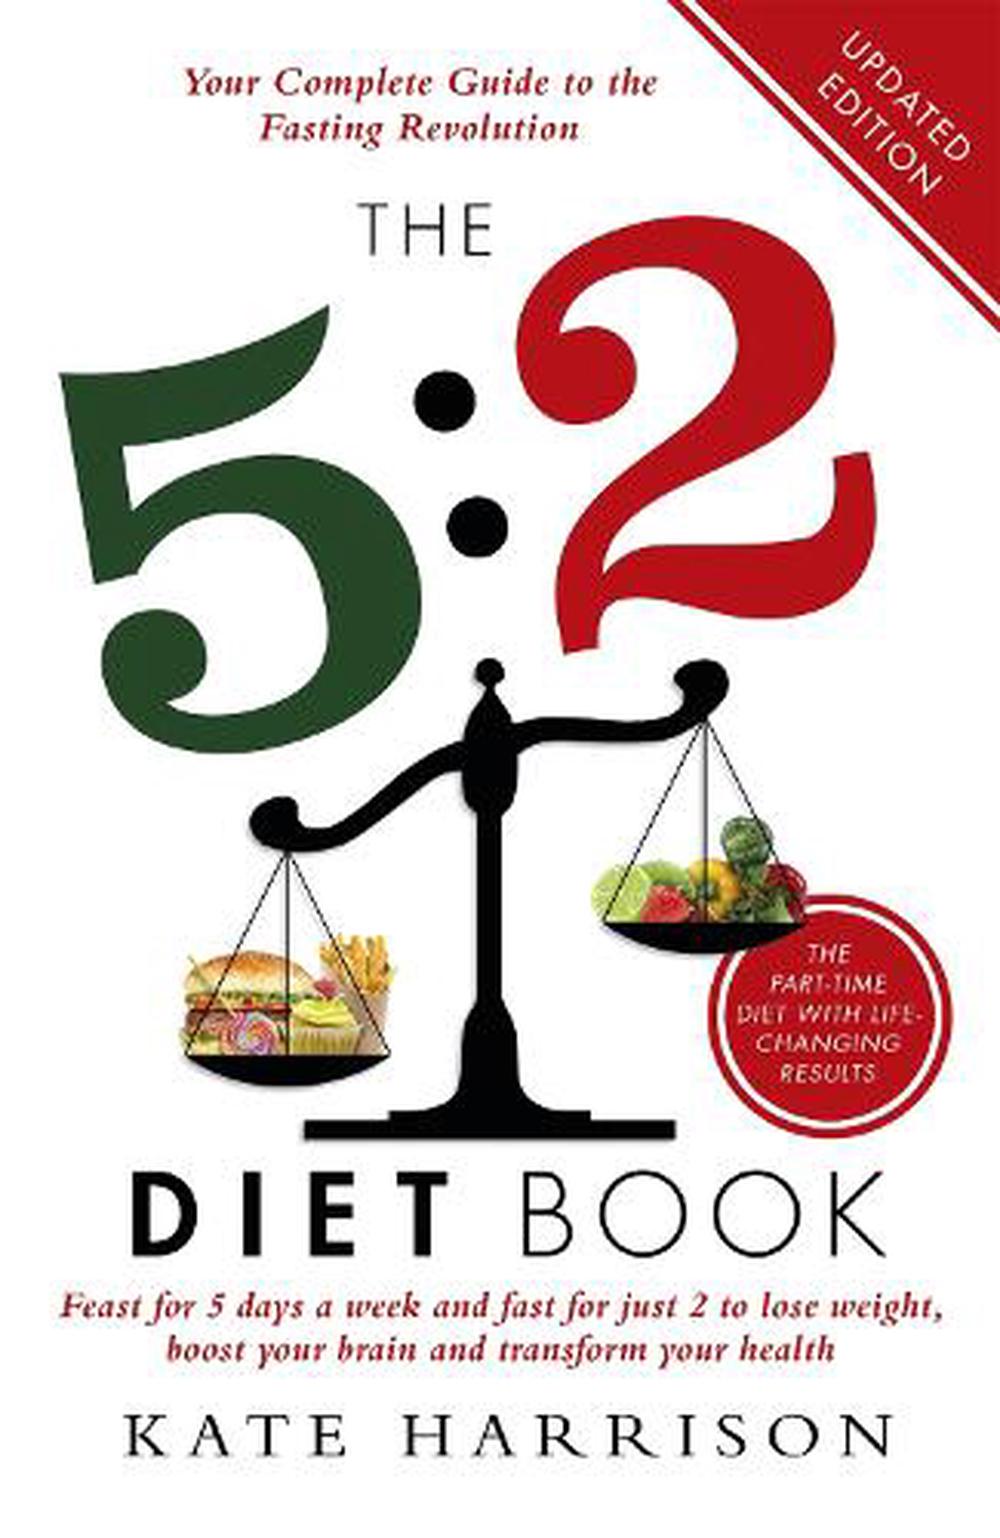 The 5:2 Diet Book by Kate Harrison, Paperback, 9781409146698 | Buy